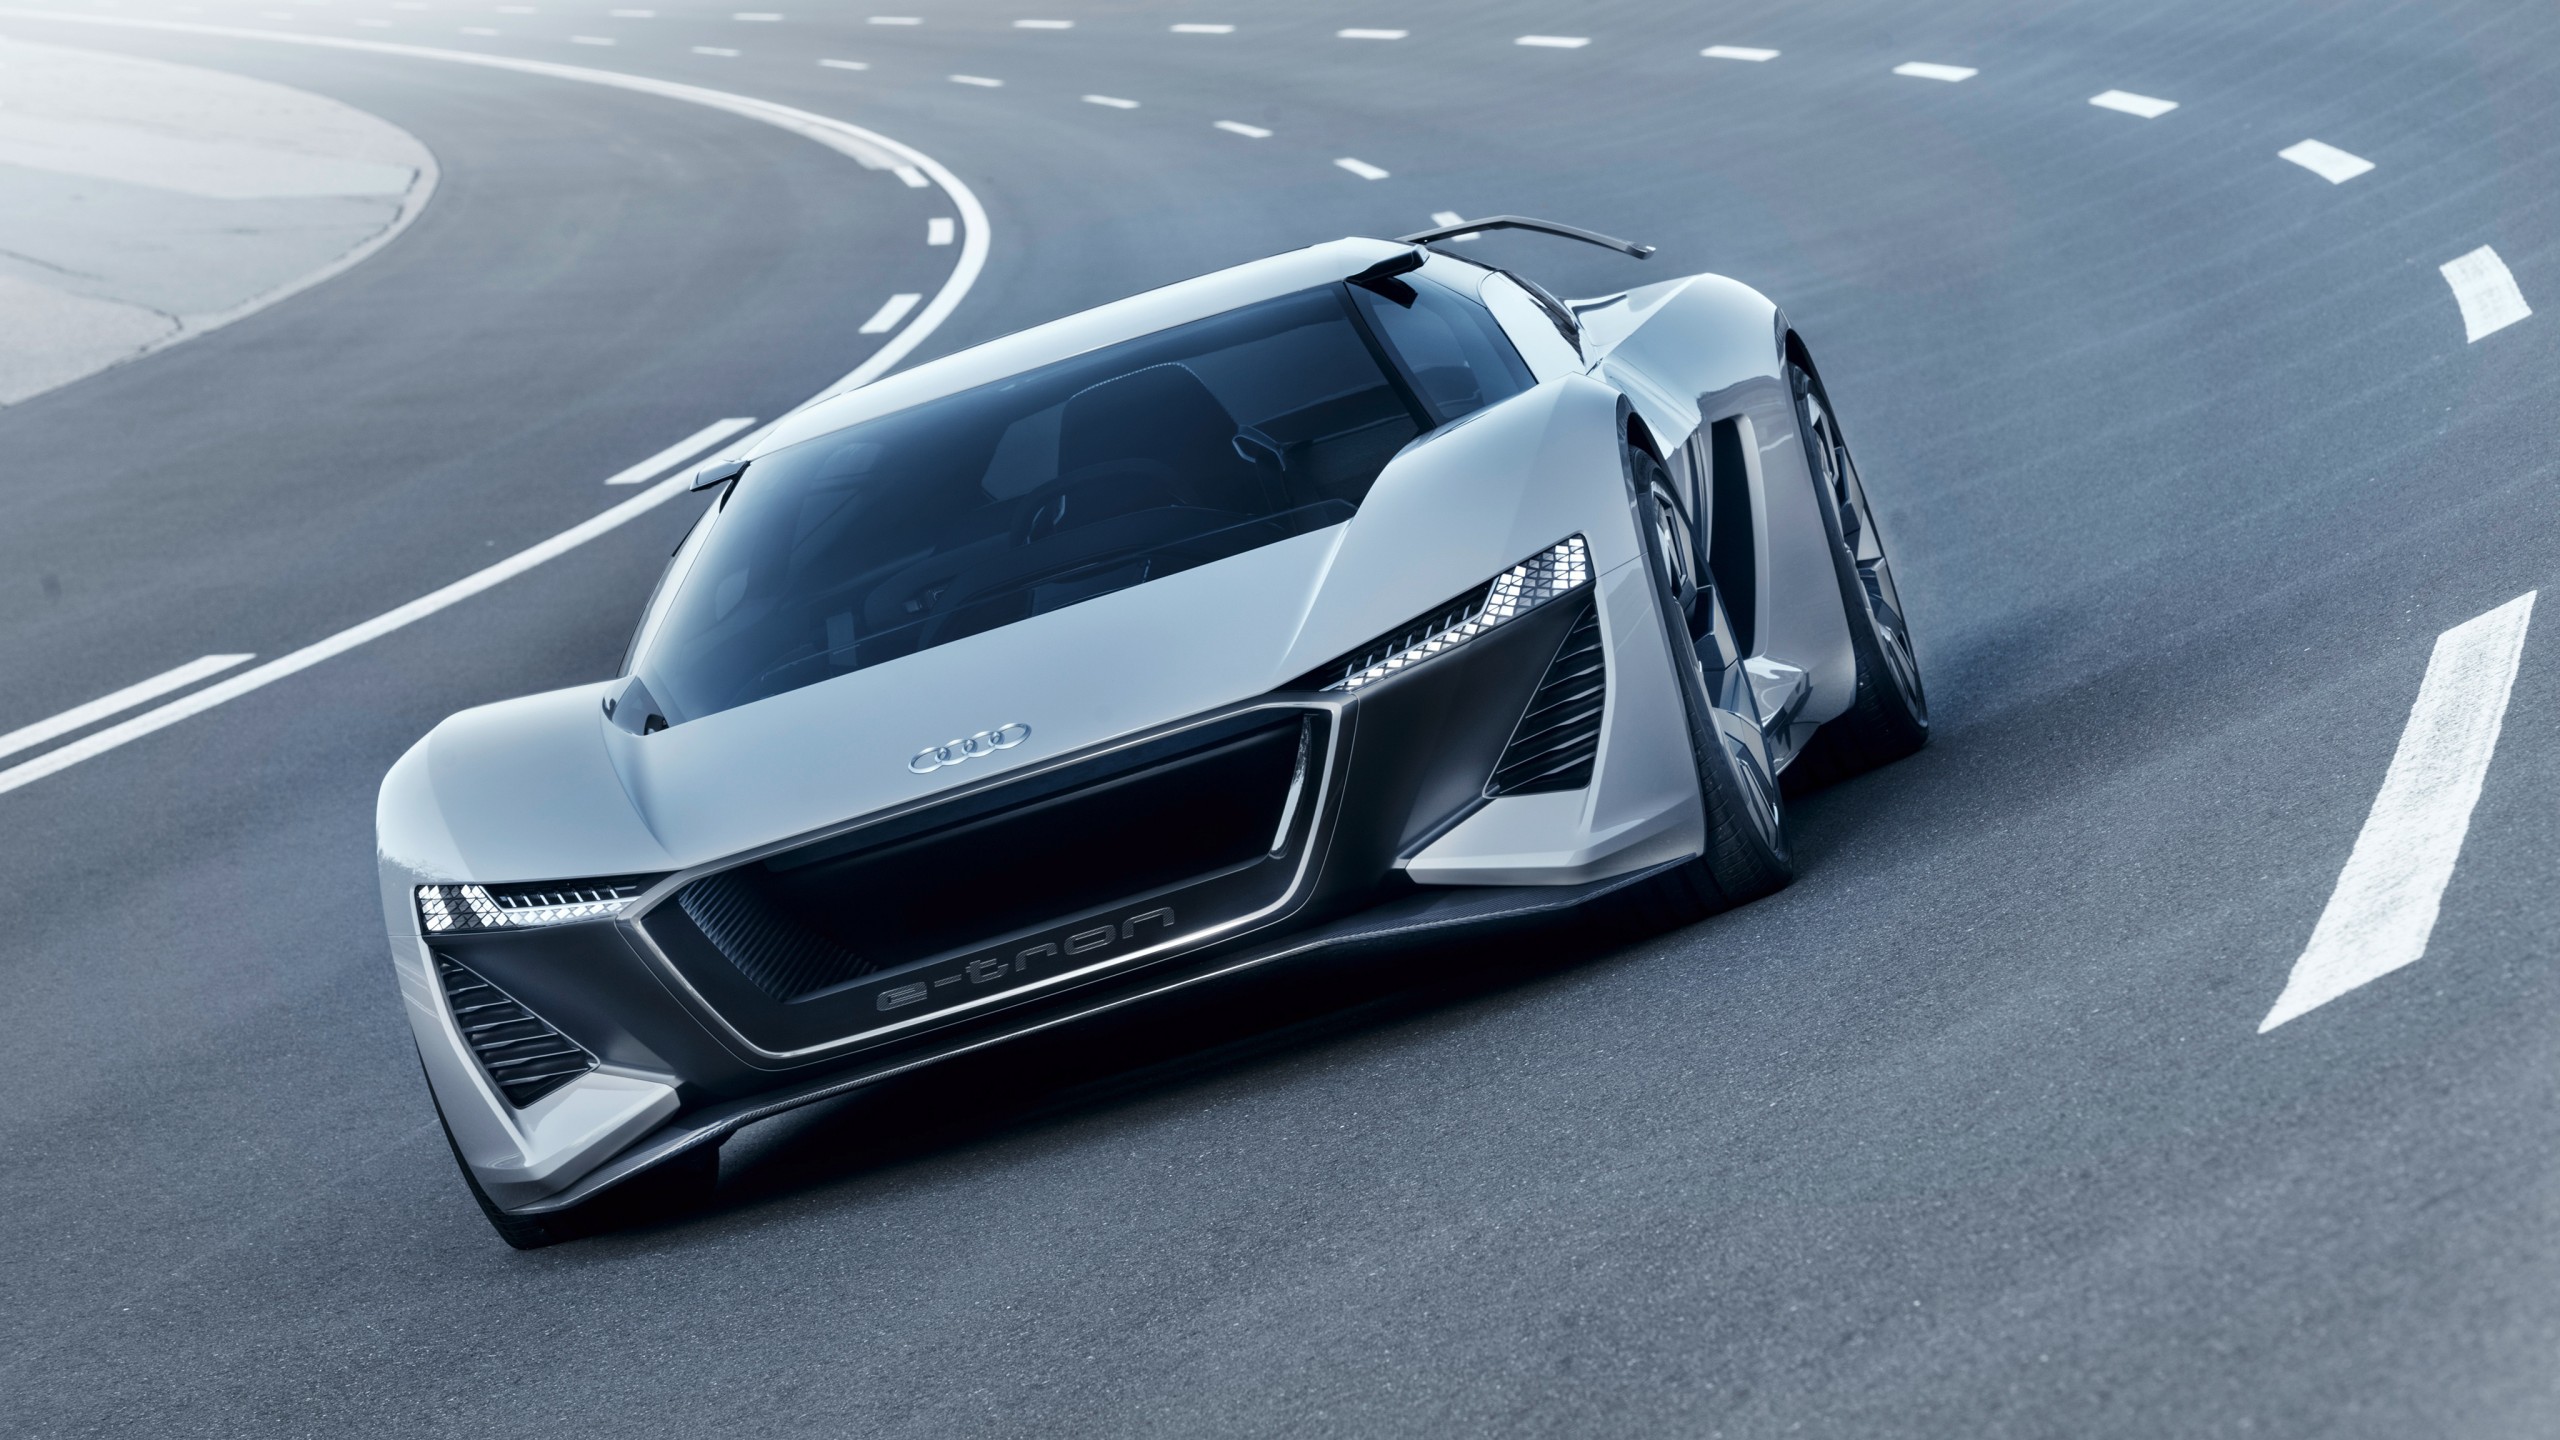 bao john wick surprised everyone by being the first owner of the audi r super sports car the world s fastest future supercar 6548cadc734c9 John Wick Surprised Everyone By Being The First Owner Of The 2023 Audi R10 Super Sports Car, The World's Fastest Future Supercar